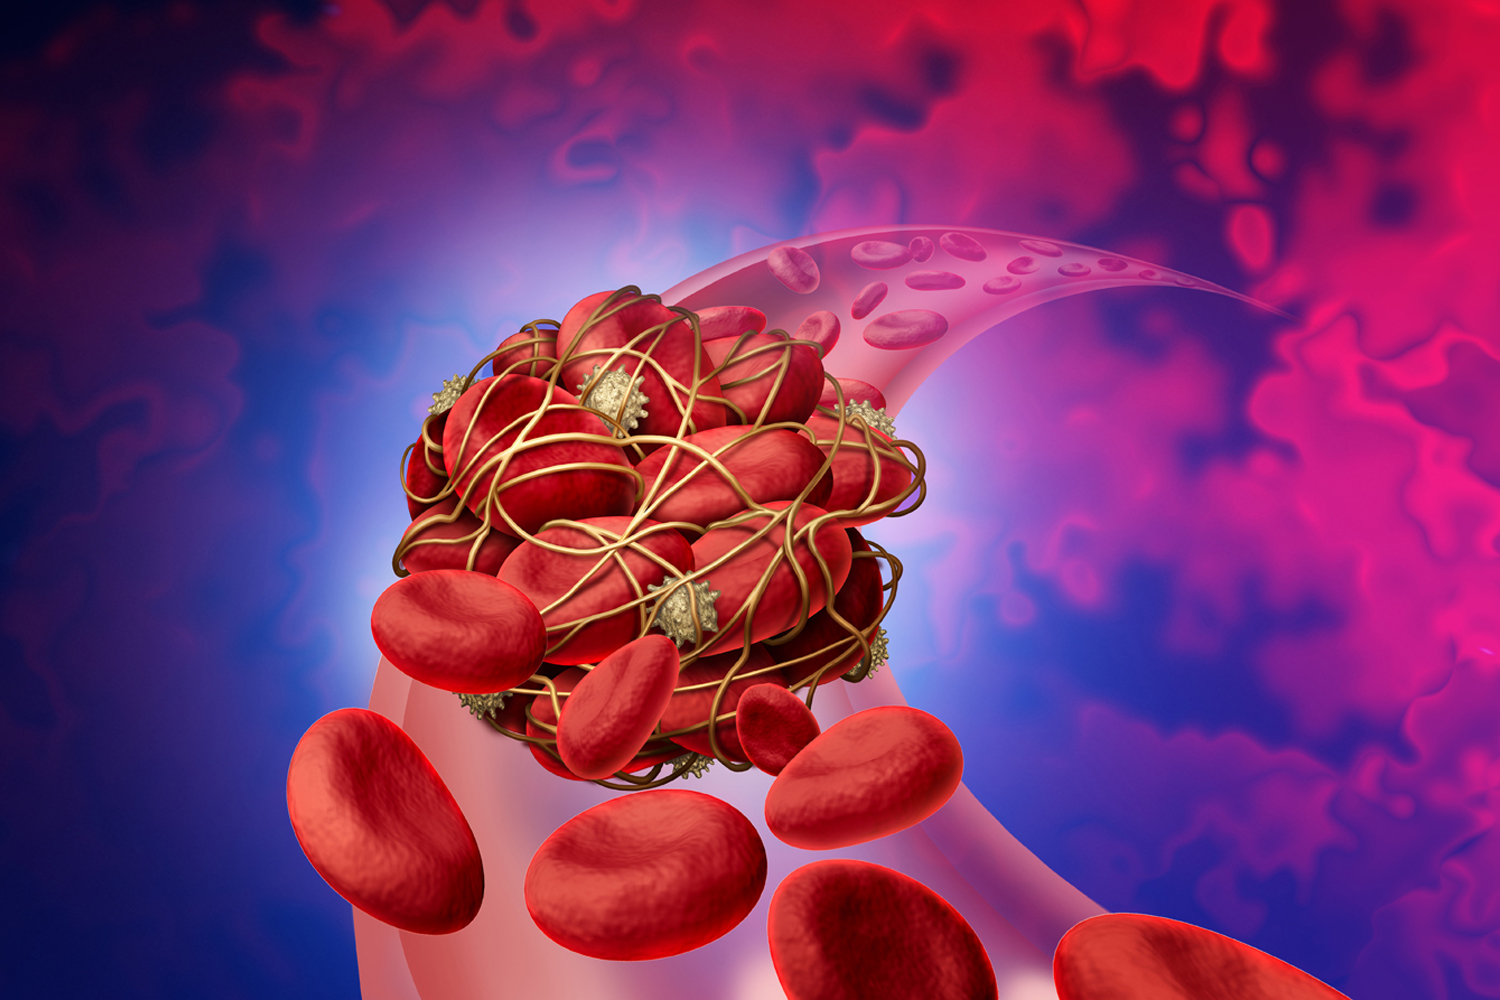 Preventing Blood Clots